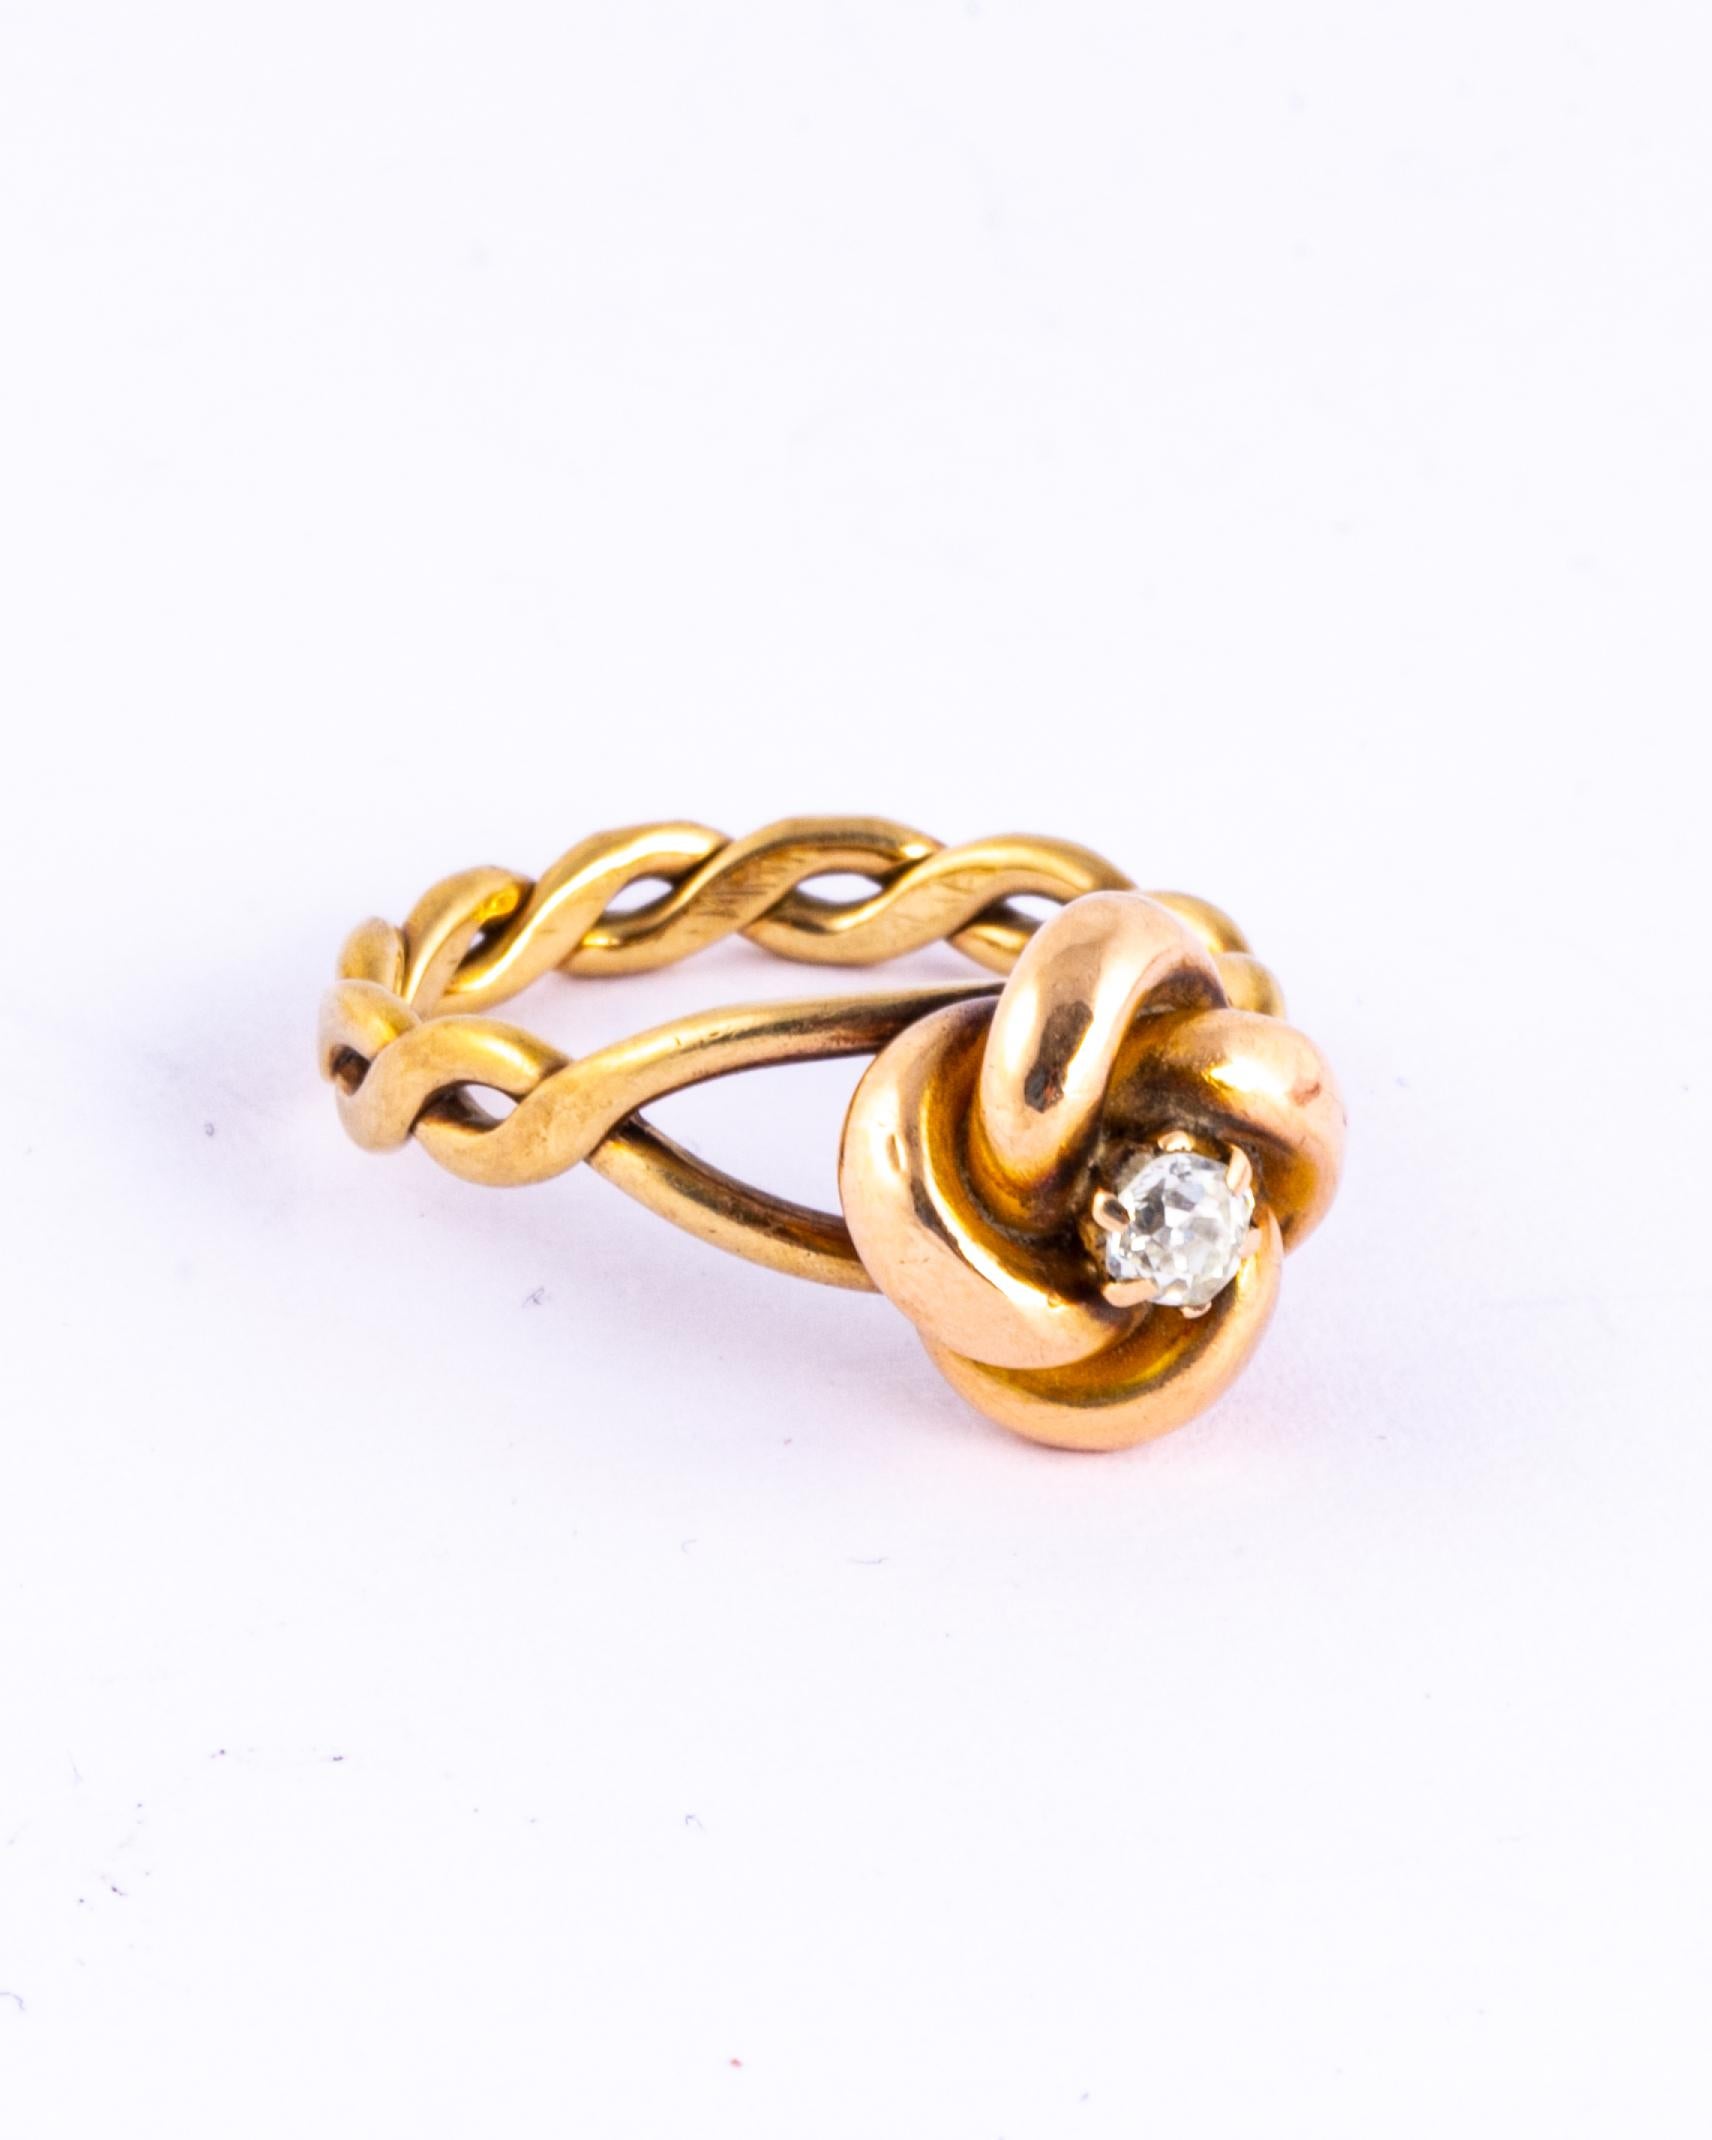 This gorgeous and chunky lovers knot ring hold a diamond at the centre. The knot sits up high on the twisted band and is beautifully glossy. Modelled in 15ct gold. The diamond measures 15pts and is old mine cut. 

Ring Size: K 1/2 or 5 1/2 
Height